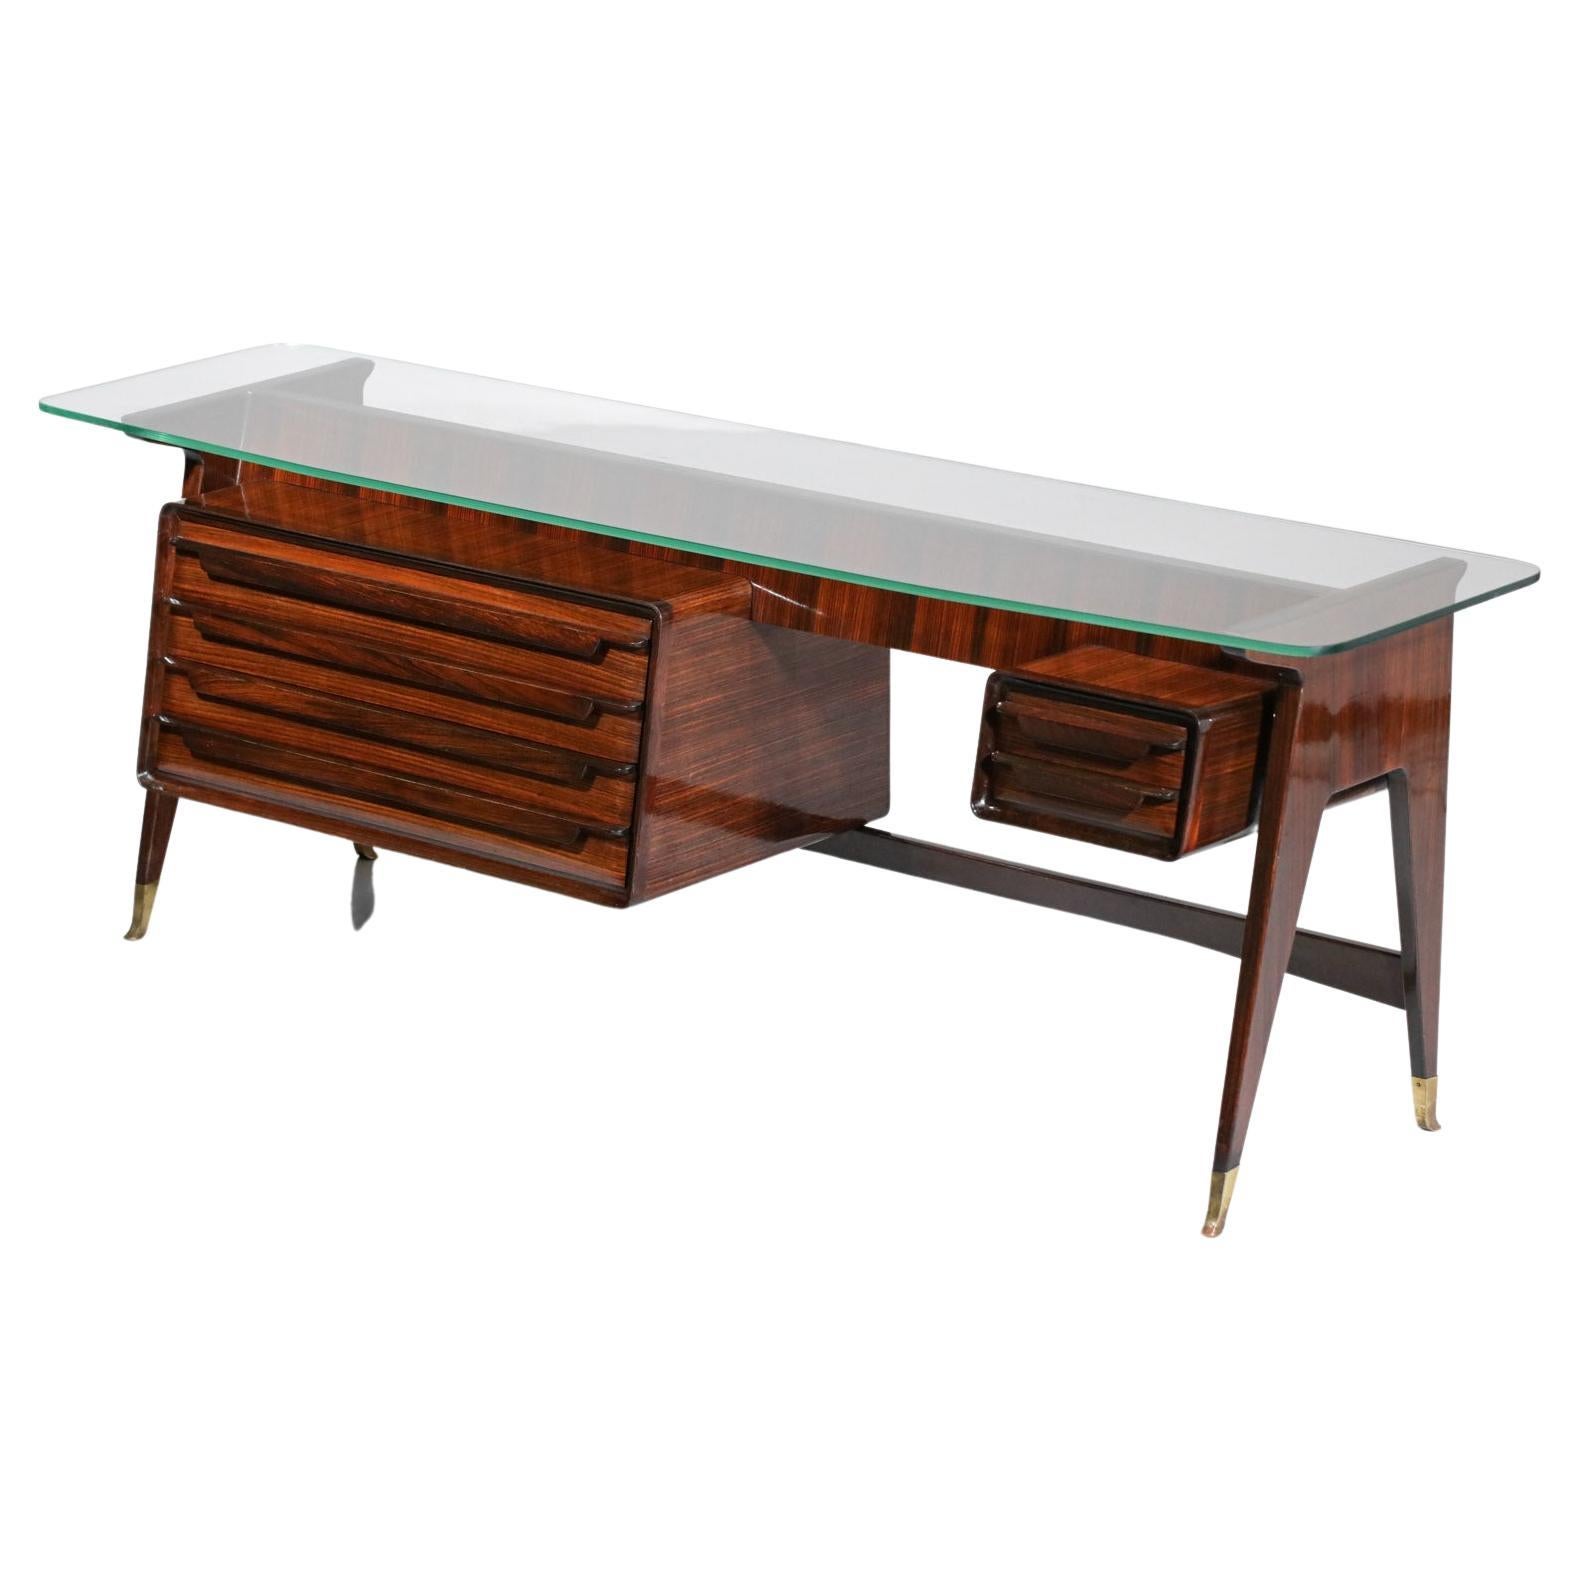 Italian sideboard or console from the 60's by the designer Vittorio Dassi. Structure in veneered and solid wood, top in 1.2 cm thick glass slab. This enfilade is composed of six drawers on each side of the piece of furniture, the legs are finished